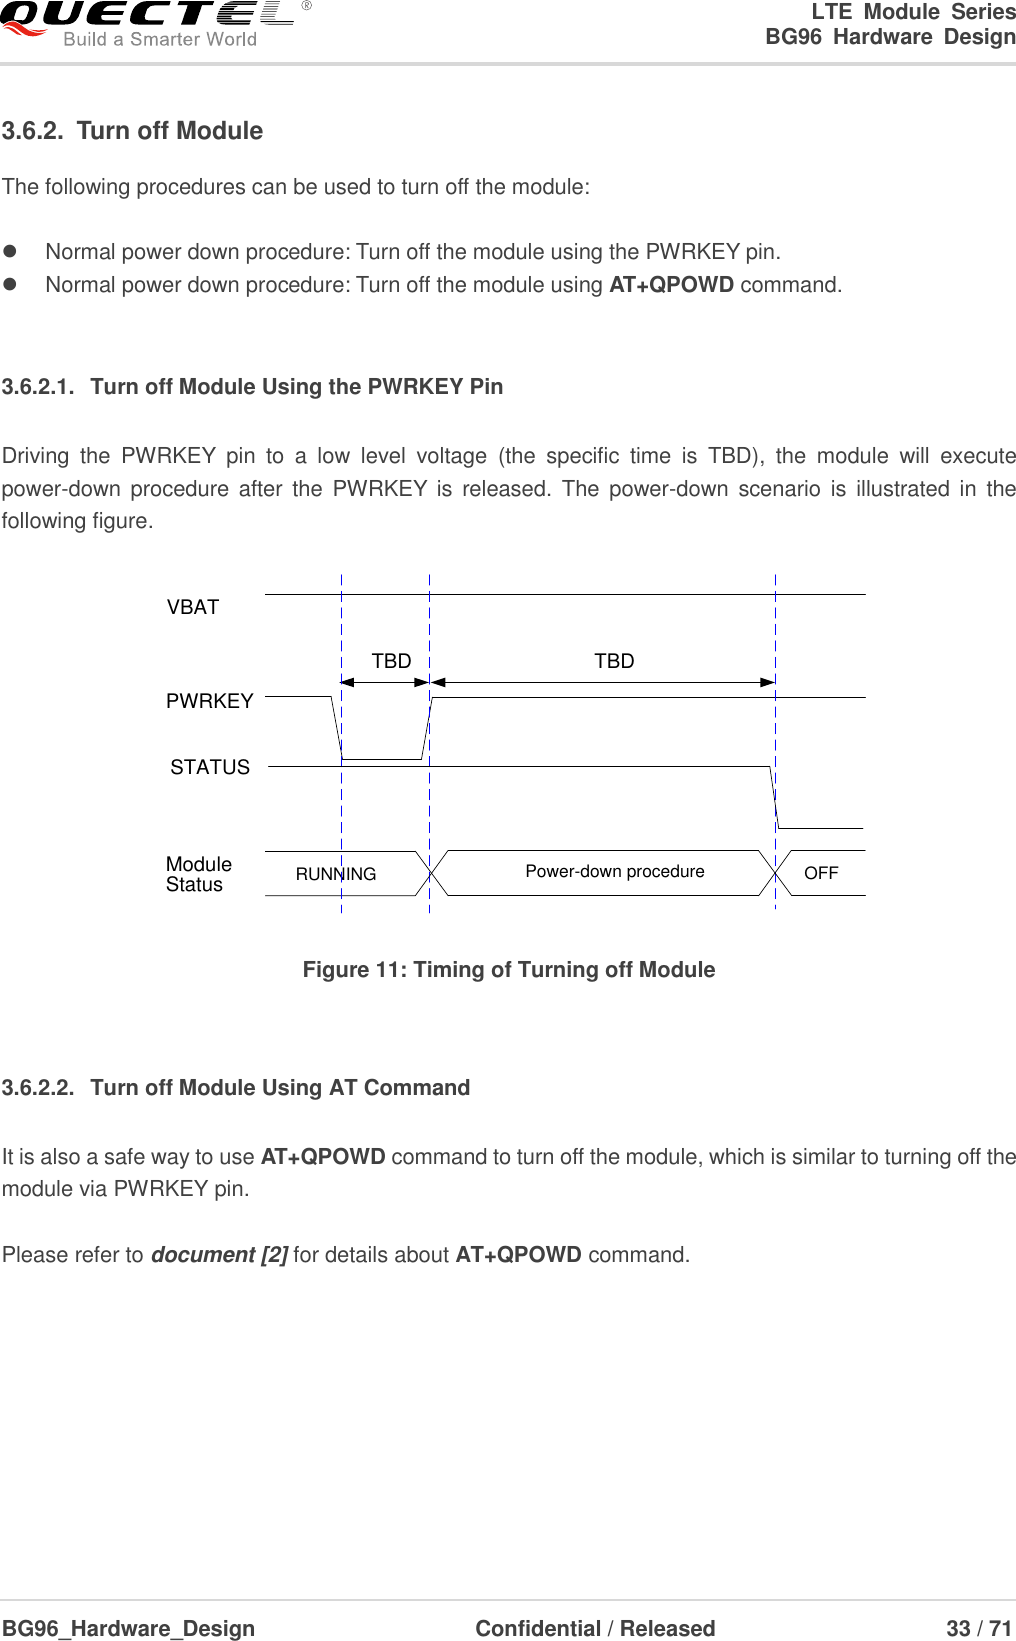 LTE  Module  Series                                                  BG96  Hardware  Design  BG96_Hardware_Design                              Confidential / Released                             33 / 71    3.6.2.  Turn off Module   The following procedures can be used to turn off the module:    Normal power down procedure: Turn off the module using the PWRKEY pin.   Normal power down procedure: Turn off the module using AT+QPOWD command.  3.6.2.1.  Turn off Module Using the PWRKEY Pin Driving  the  PWRKEY  pin  to  a  low  level  voltage  (the  specific  time  is  TBD),  the  module  will  execute power-down procedure after the  PWRKEY  is  released.  The  power-down  scenario  is  illustrated in  the following figure. VBATPWRKEYTBDTBDRUNNING Power-down procedure OFFModuleStatusSTATUS Figure 11: Timing of Turning off Module  3.6.2.2.  Turn off Module Using AT Command It is also a safe way to use AT+QPOWD command to turn off the module, which is similar to turning off the module via PWRKEY pin.  Please refer to document [2] for details about AT+QPOWD command.      